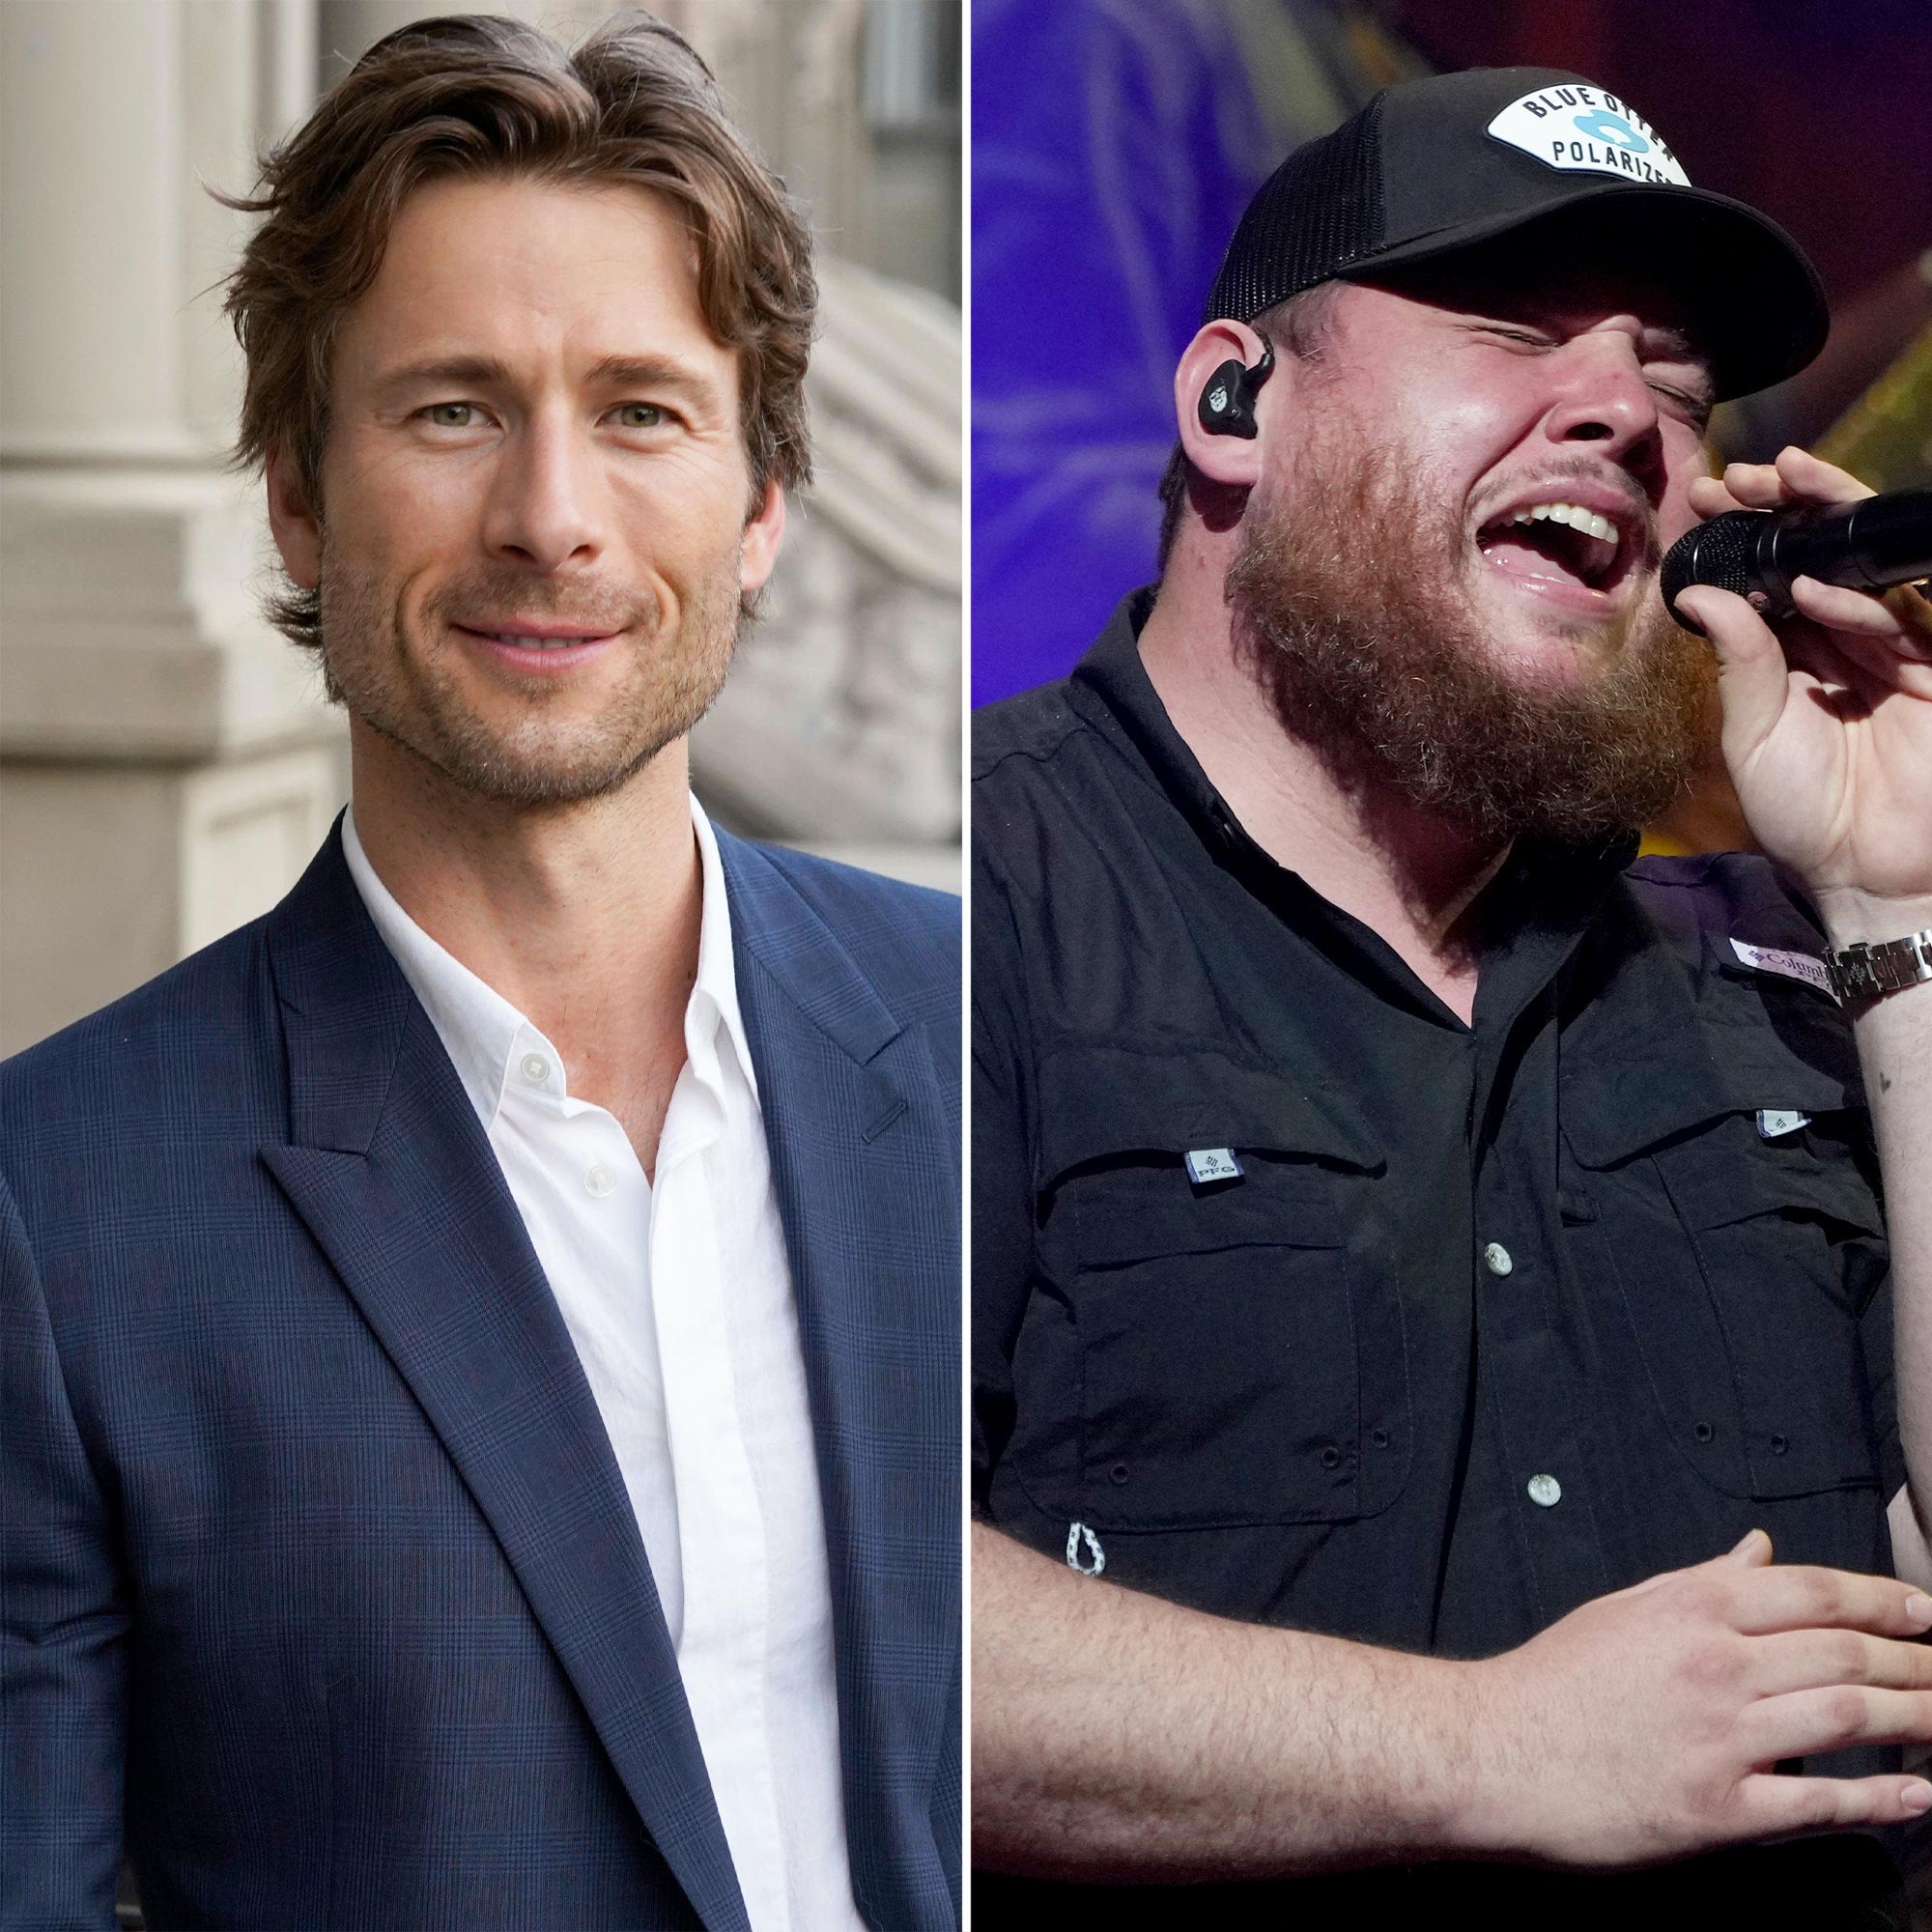 Glen Powell Shotguns Beer on Stage at Luke Combs Concert During Surprise Cameo With ‘Twisters’ Cast